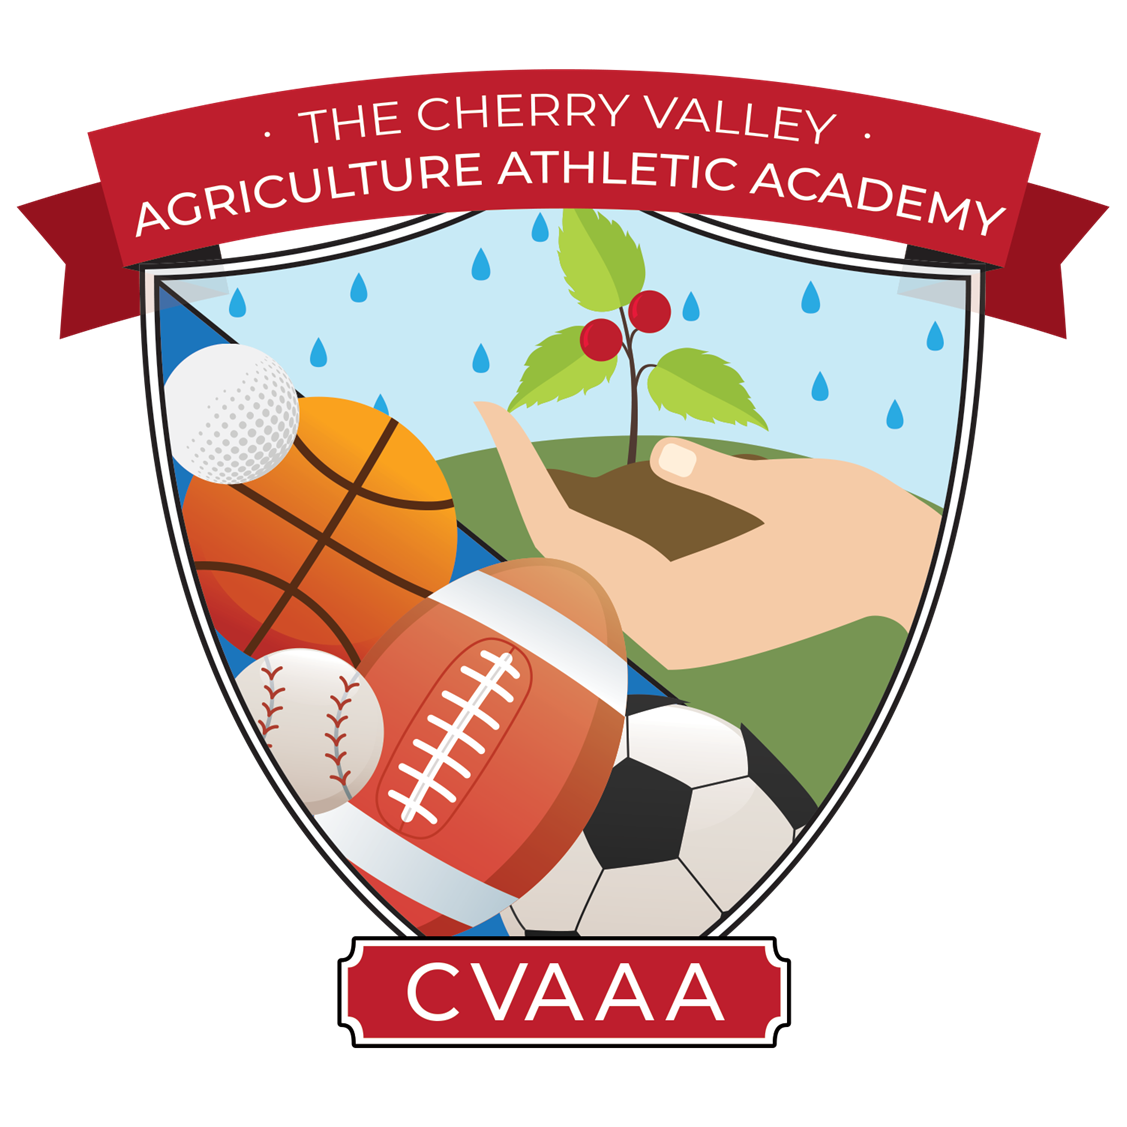 The Cherry Valley Agriculture Athletic Academy